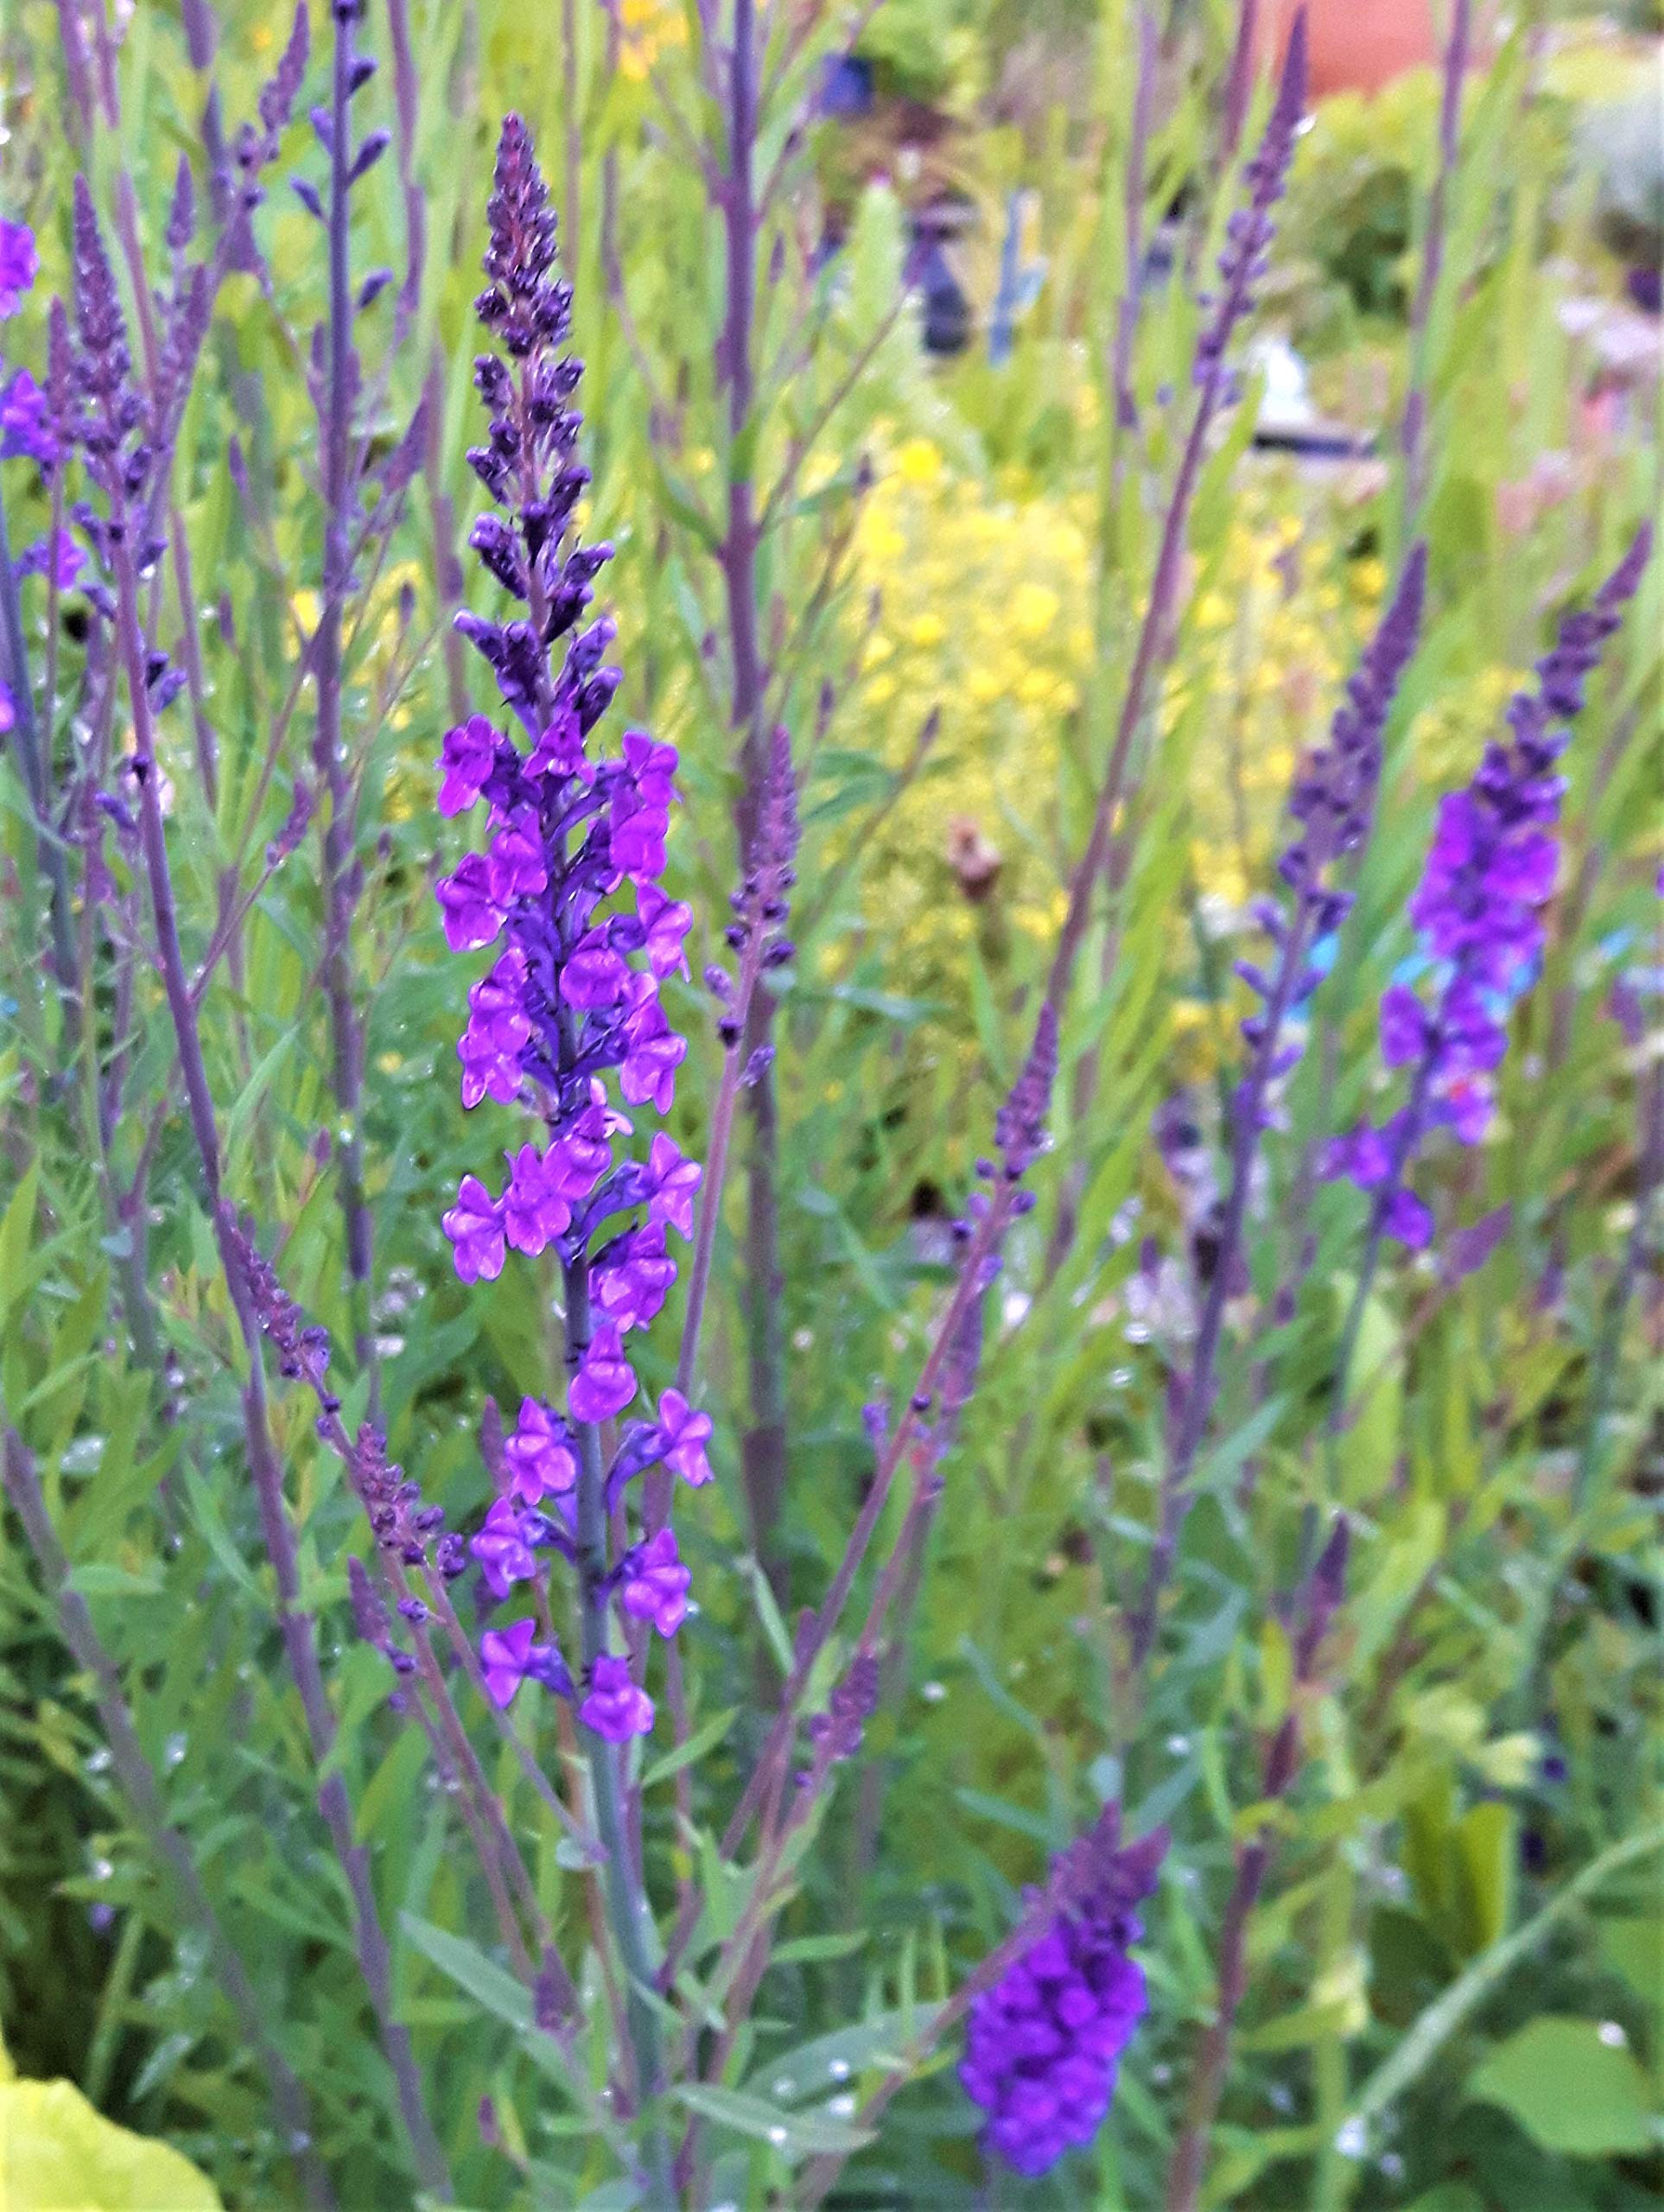 Image of Purple toadflax in a field